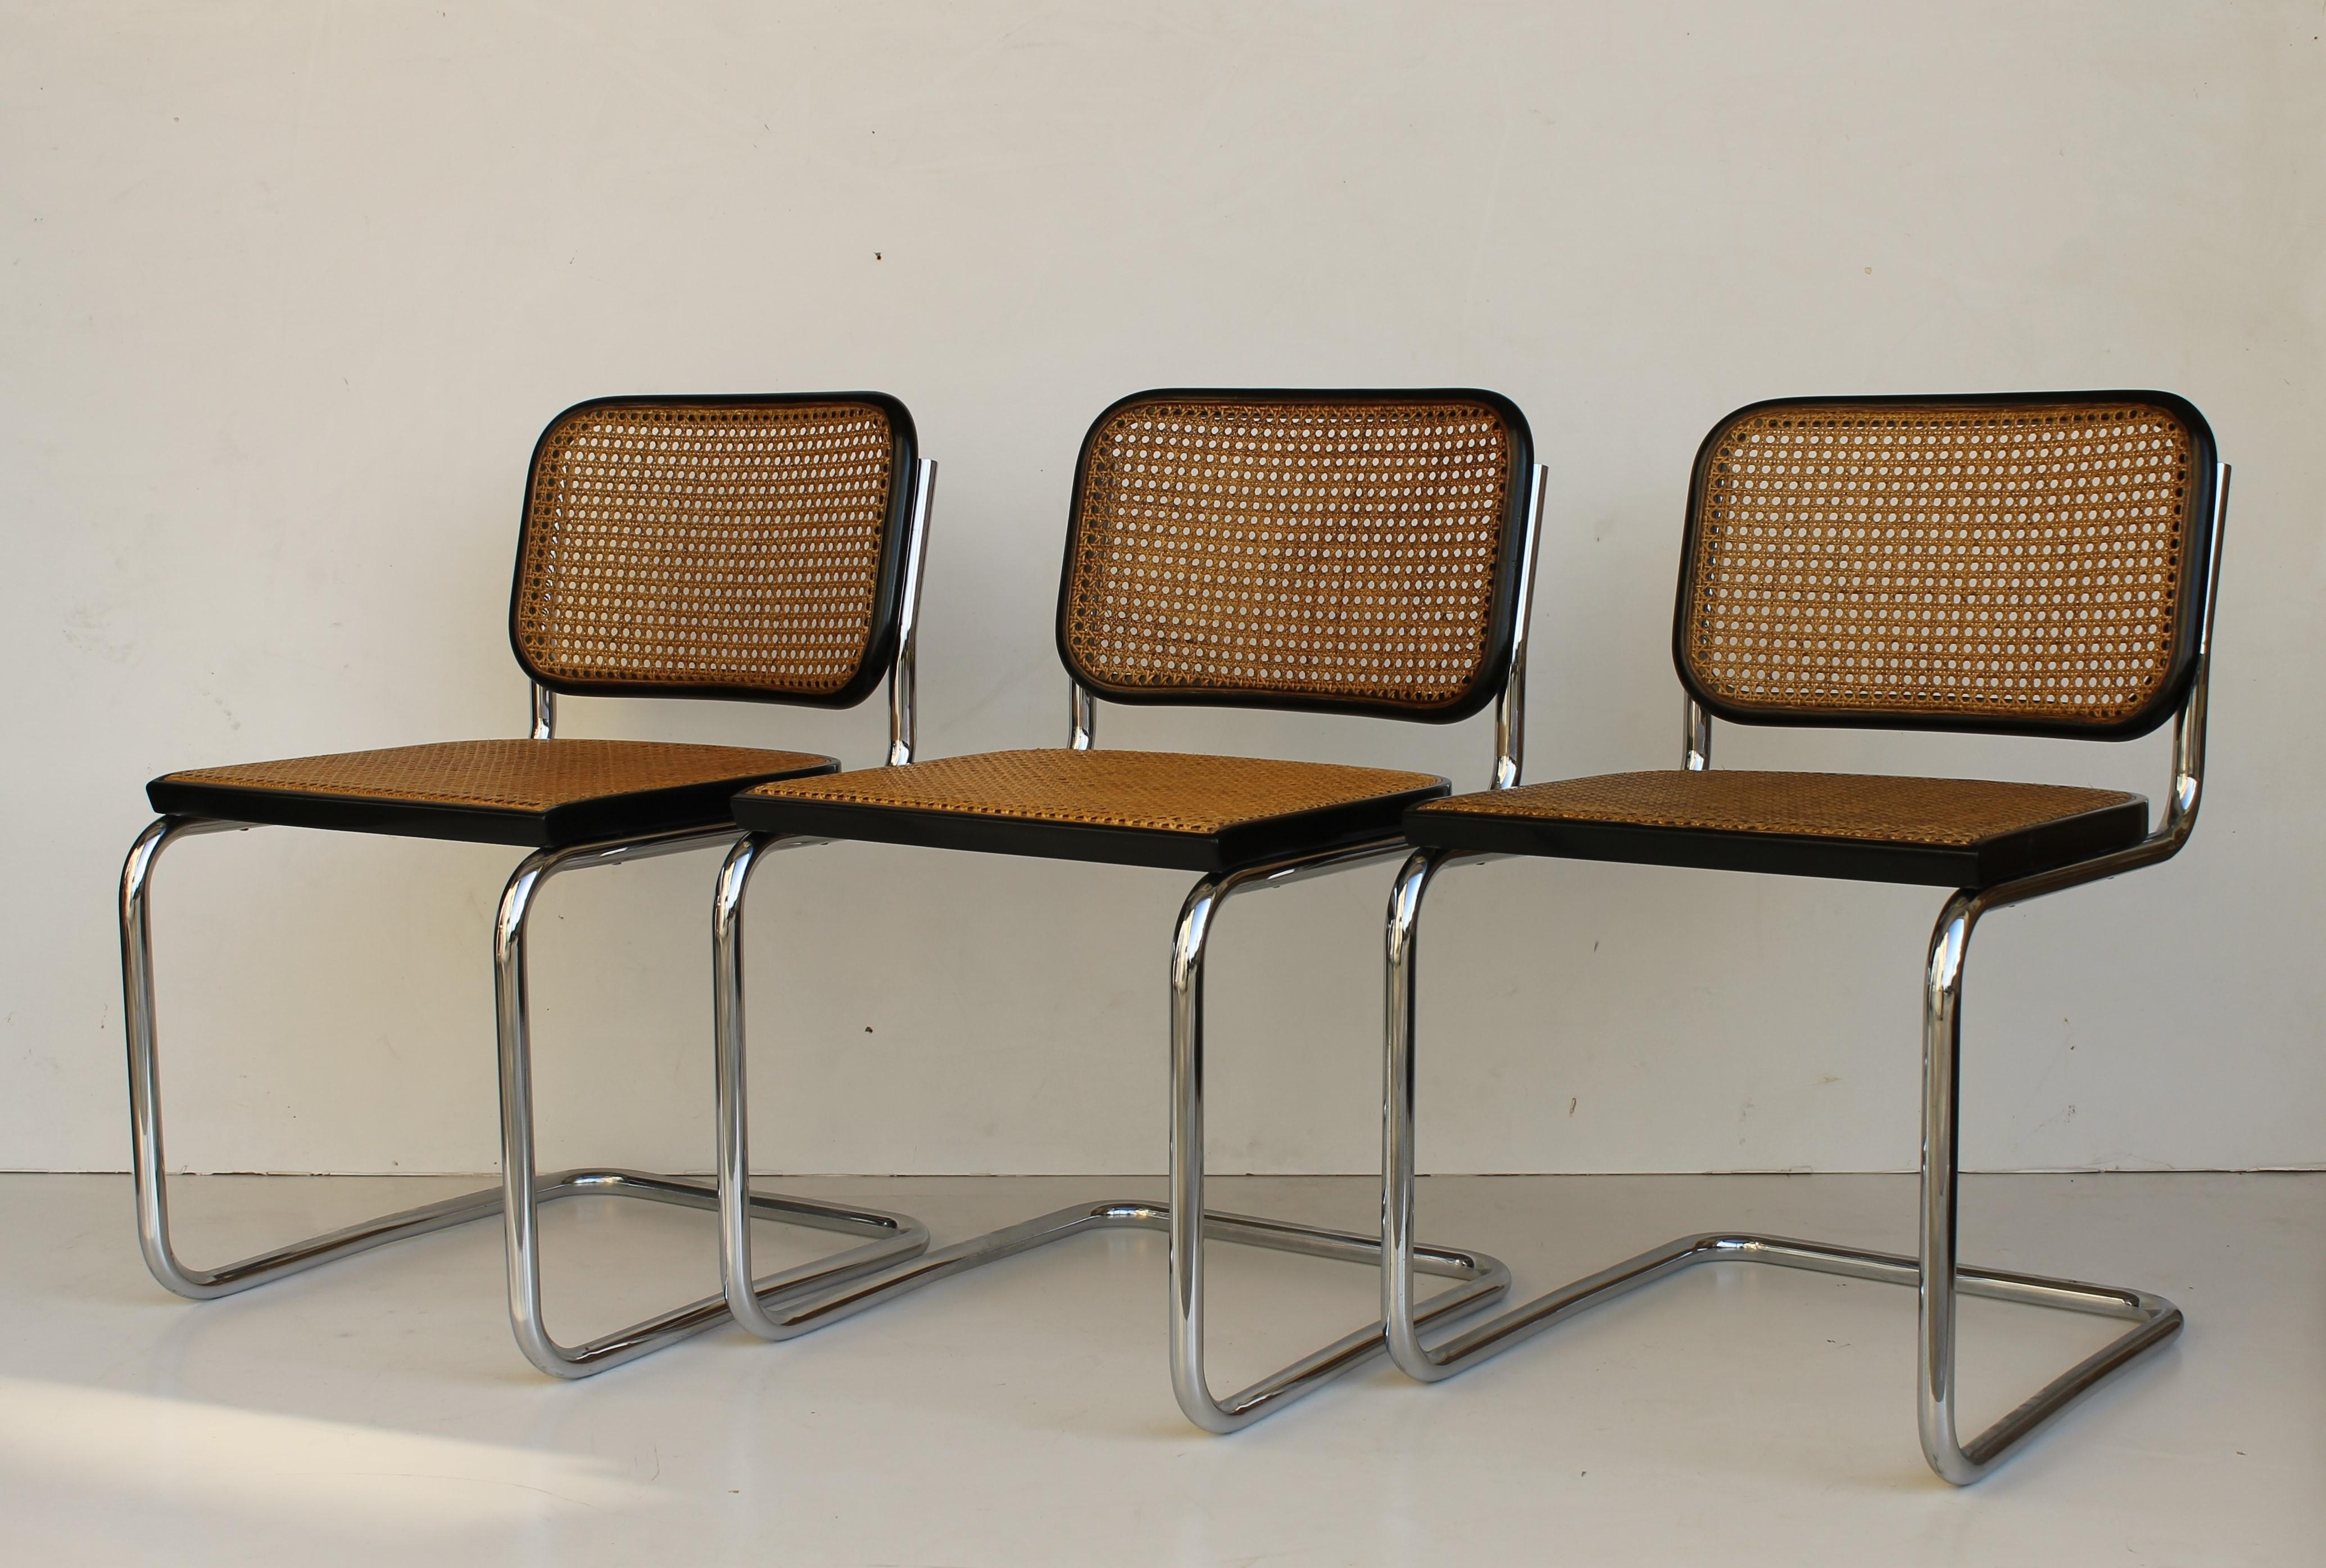 Six Cesca chairs designed by Marcel Breuer for Gavina dated circa 1968 (the project was created in 1928).

  